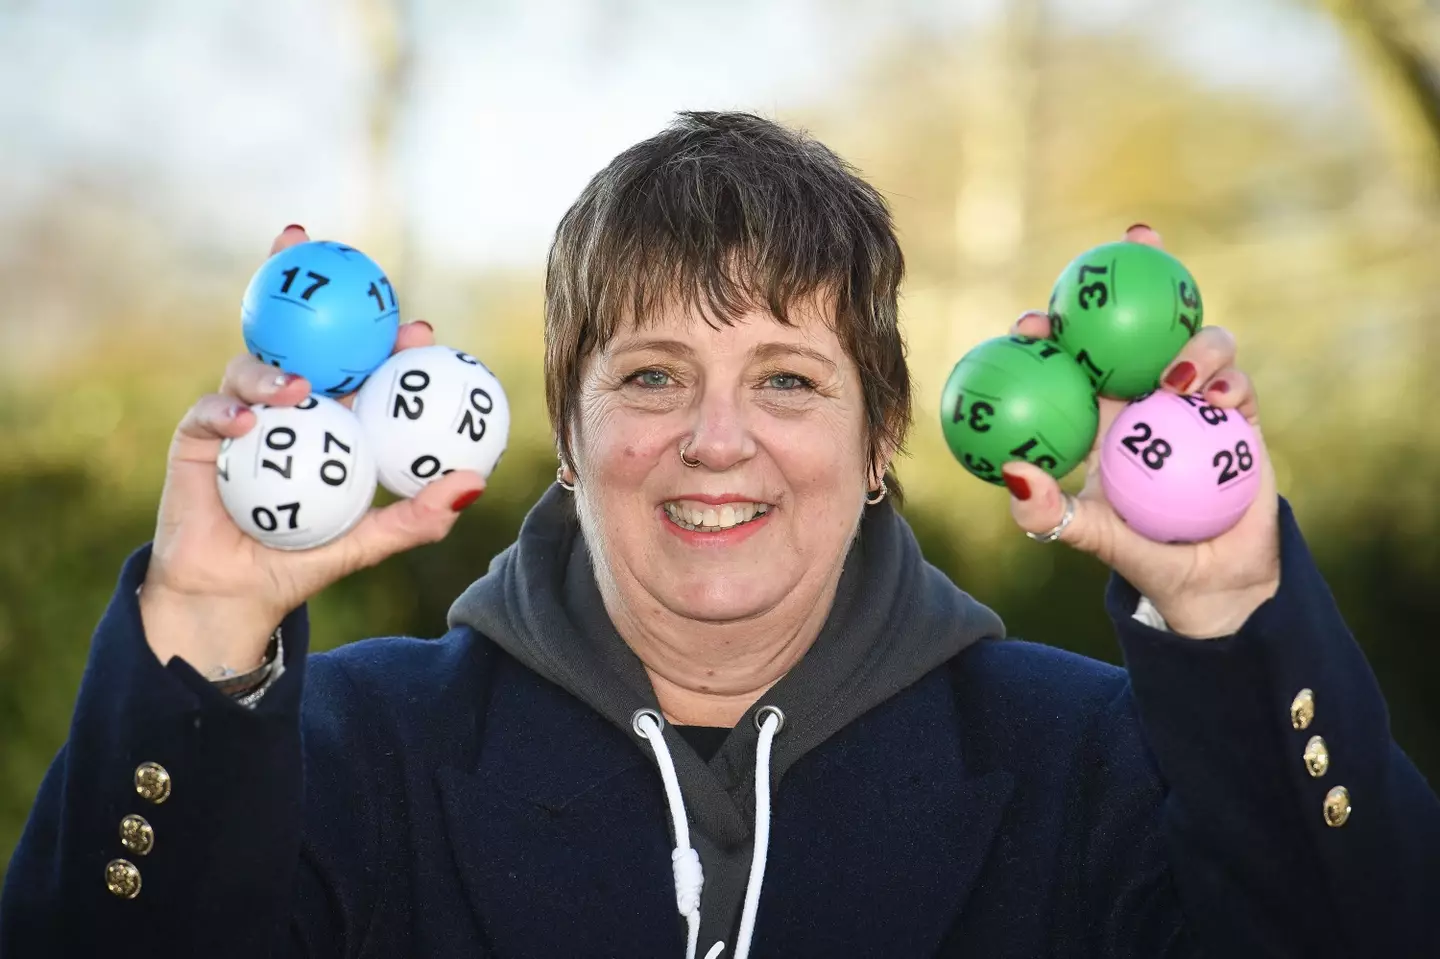 £1m for picking the correct balls.